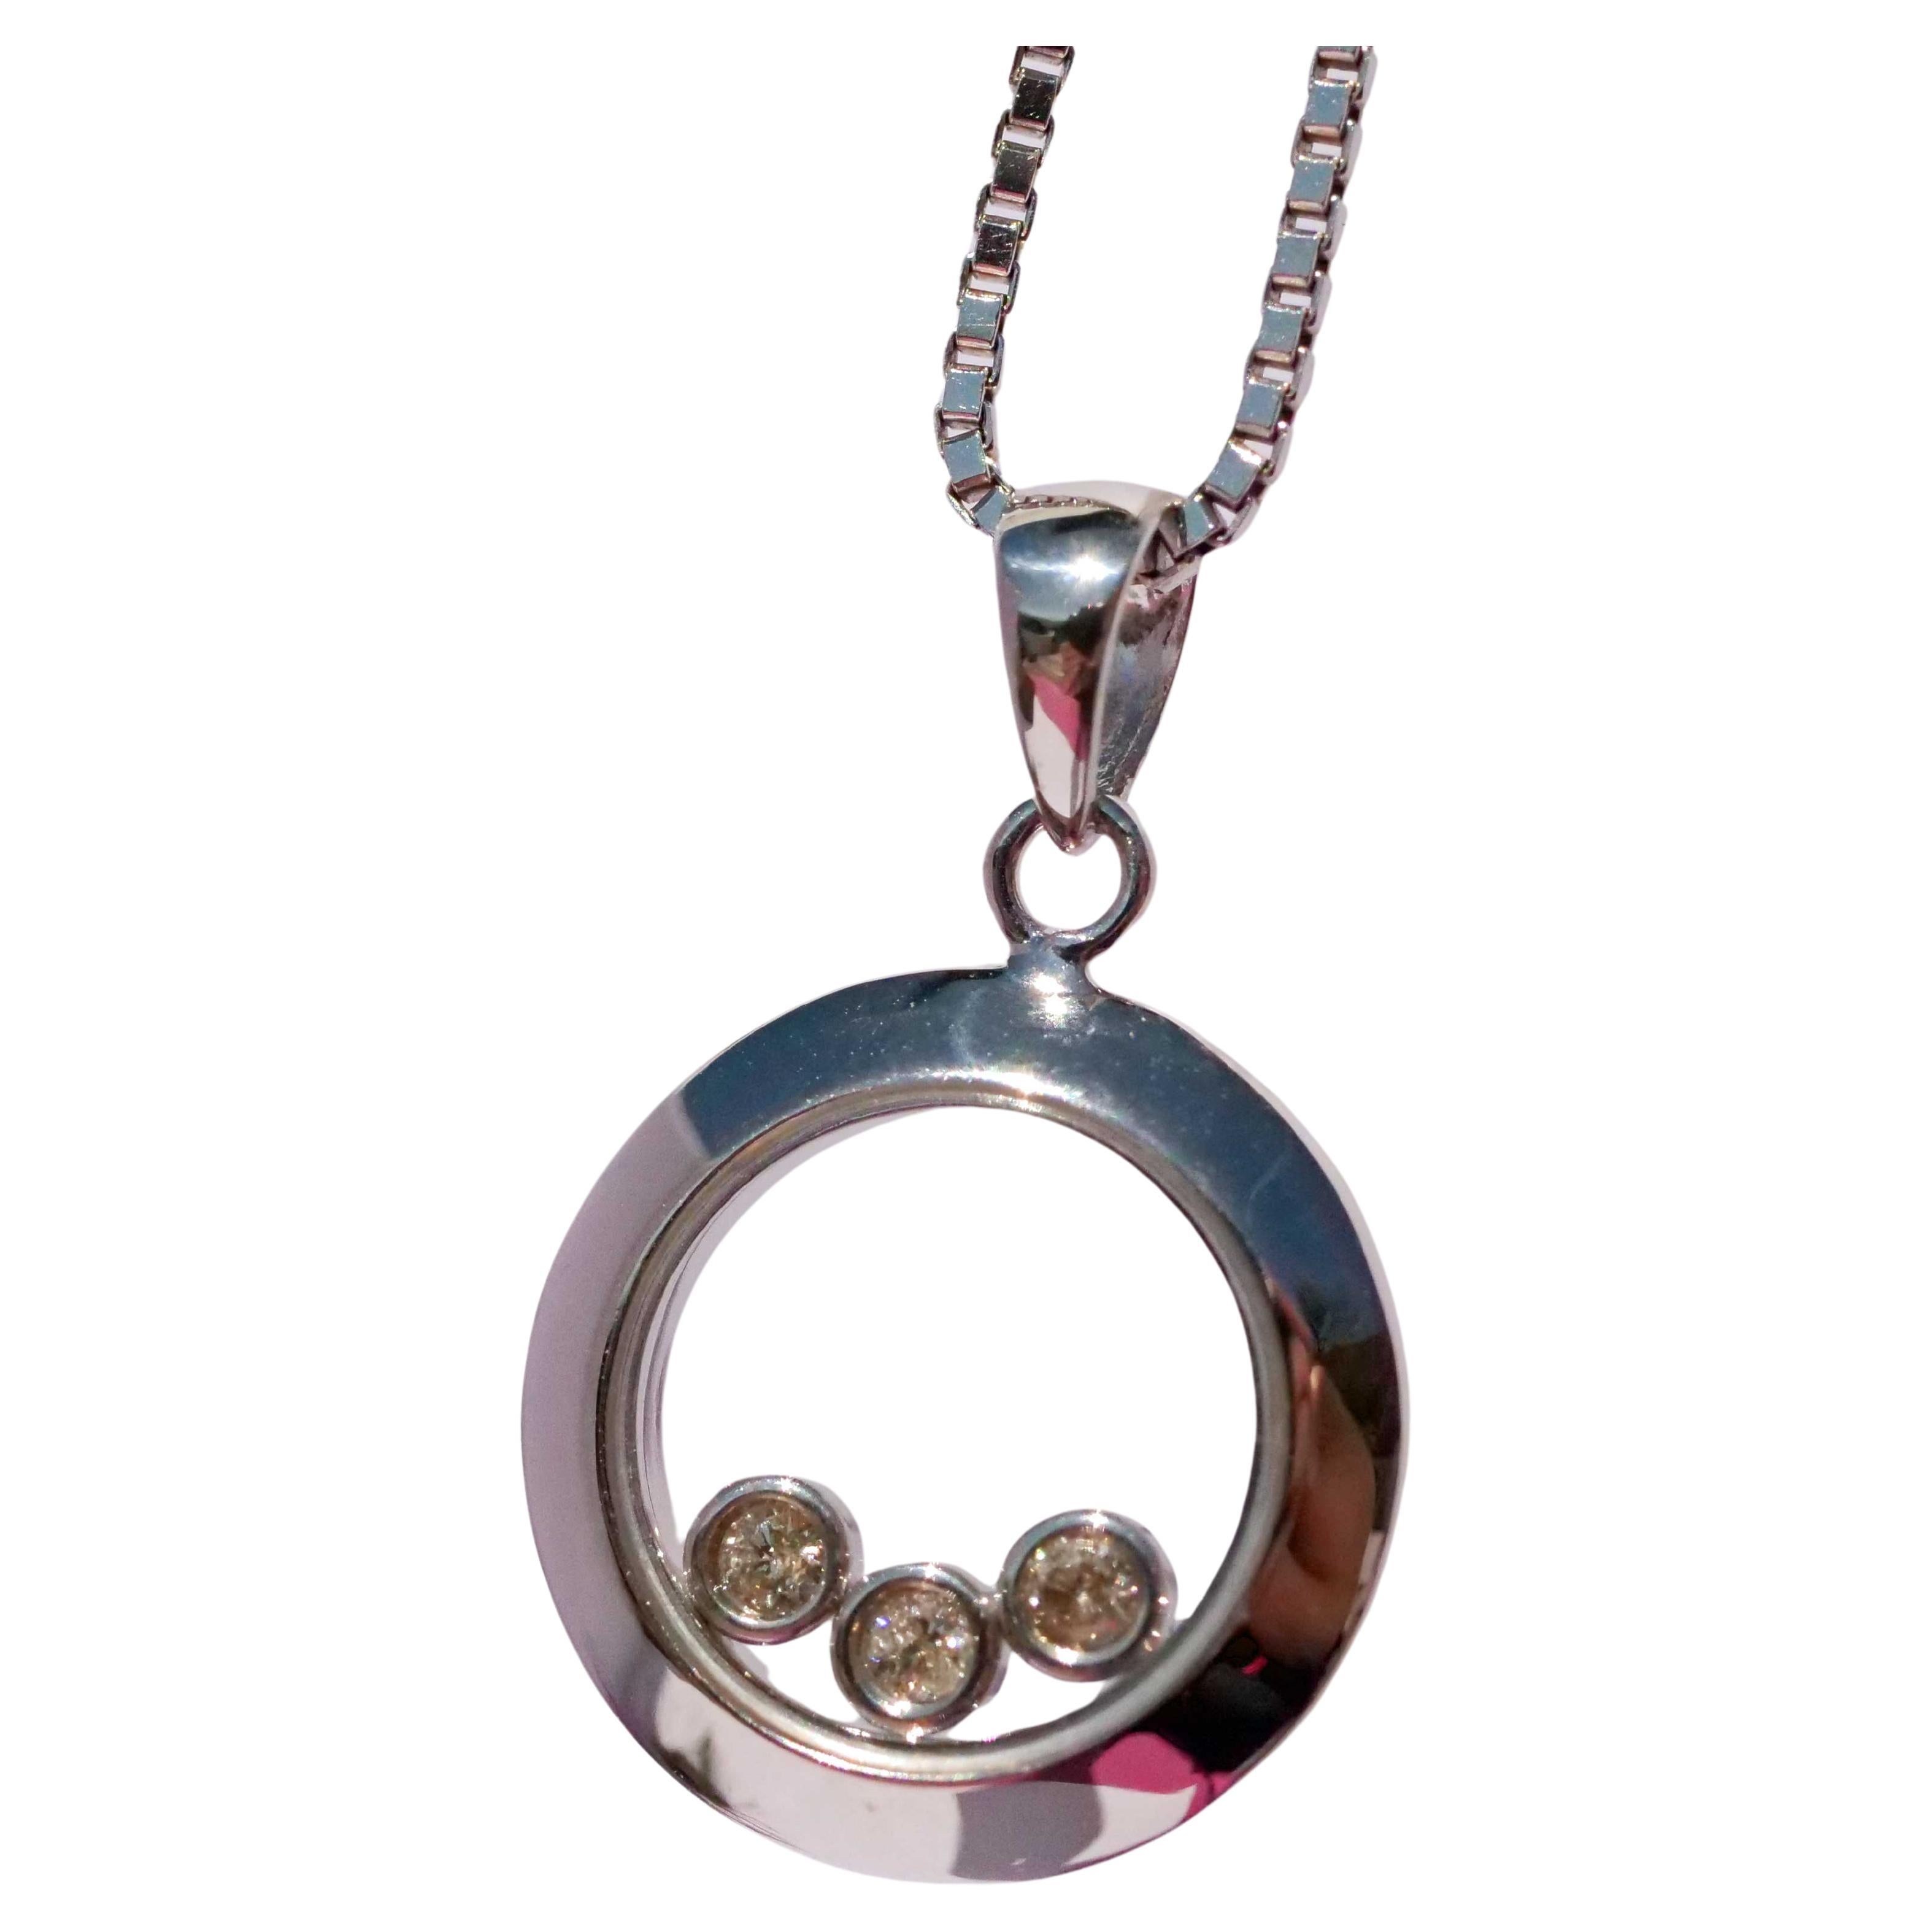 Pendant with Chain  movable full-cut Diamonds  Eye Catcher brand new Model  For Sale